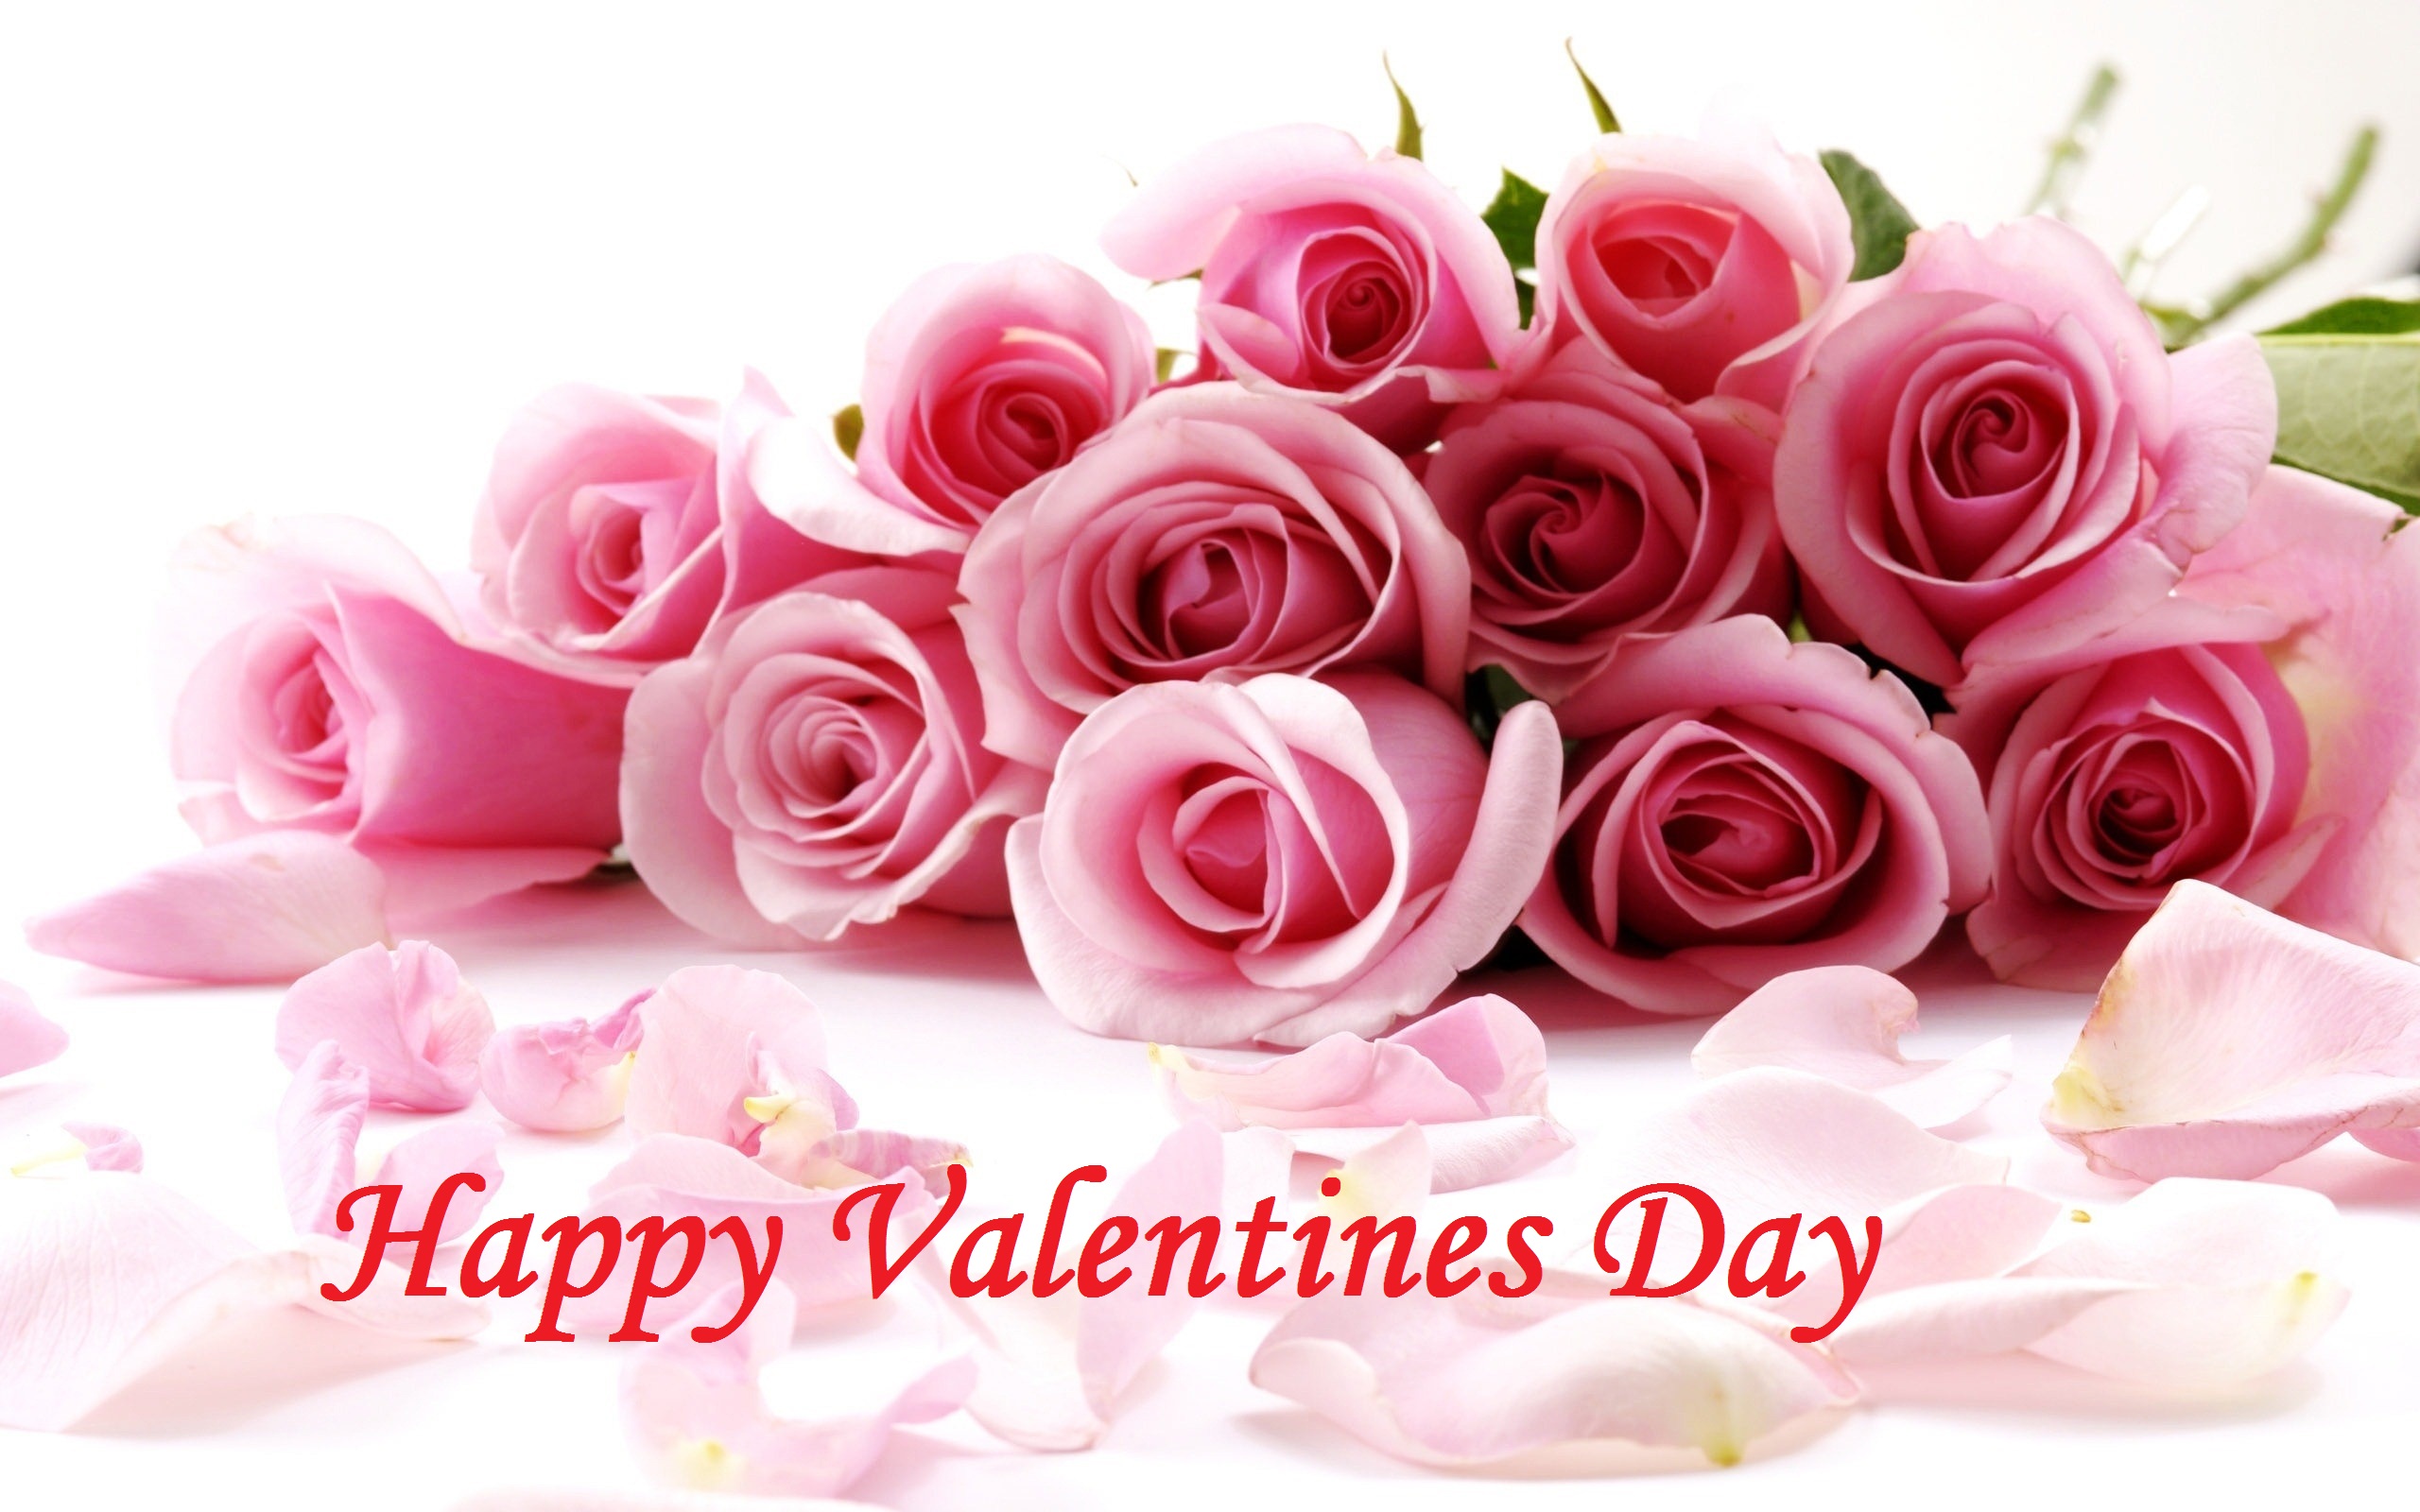 lovely flowers for valentines day images